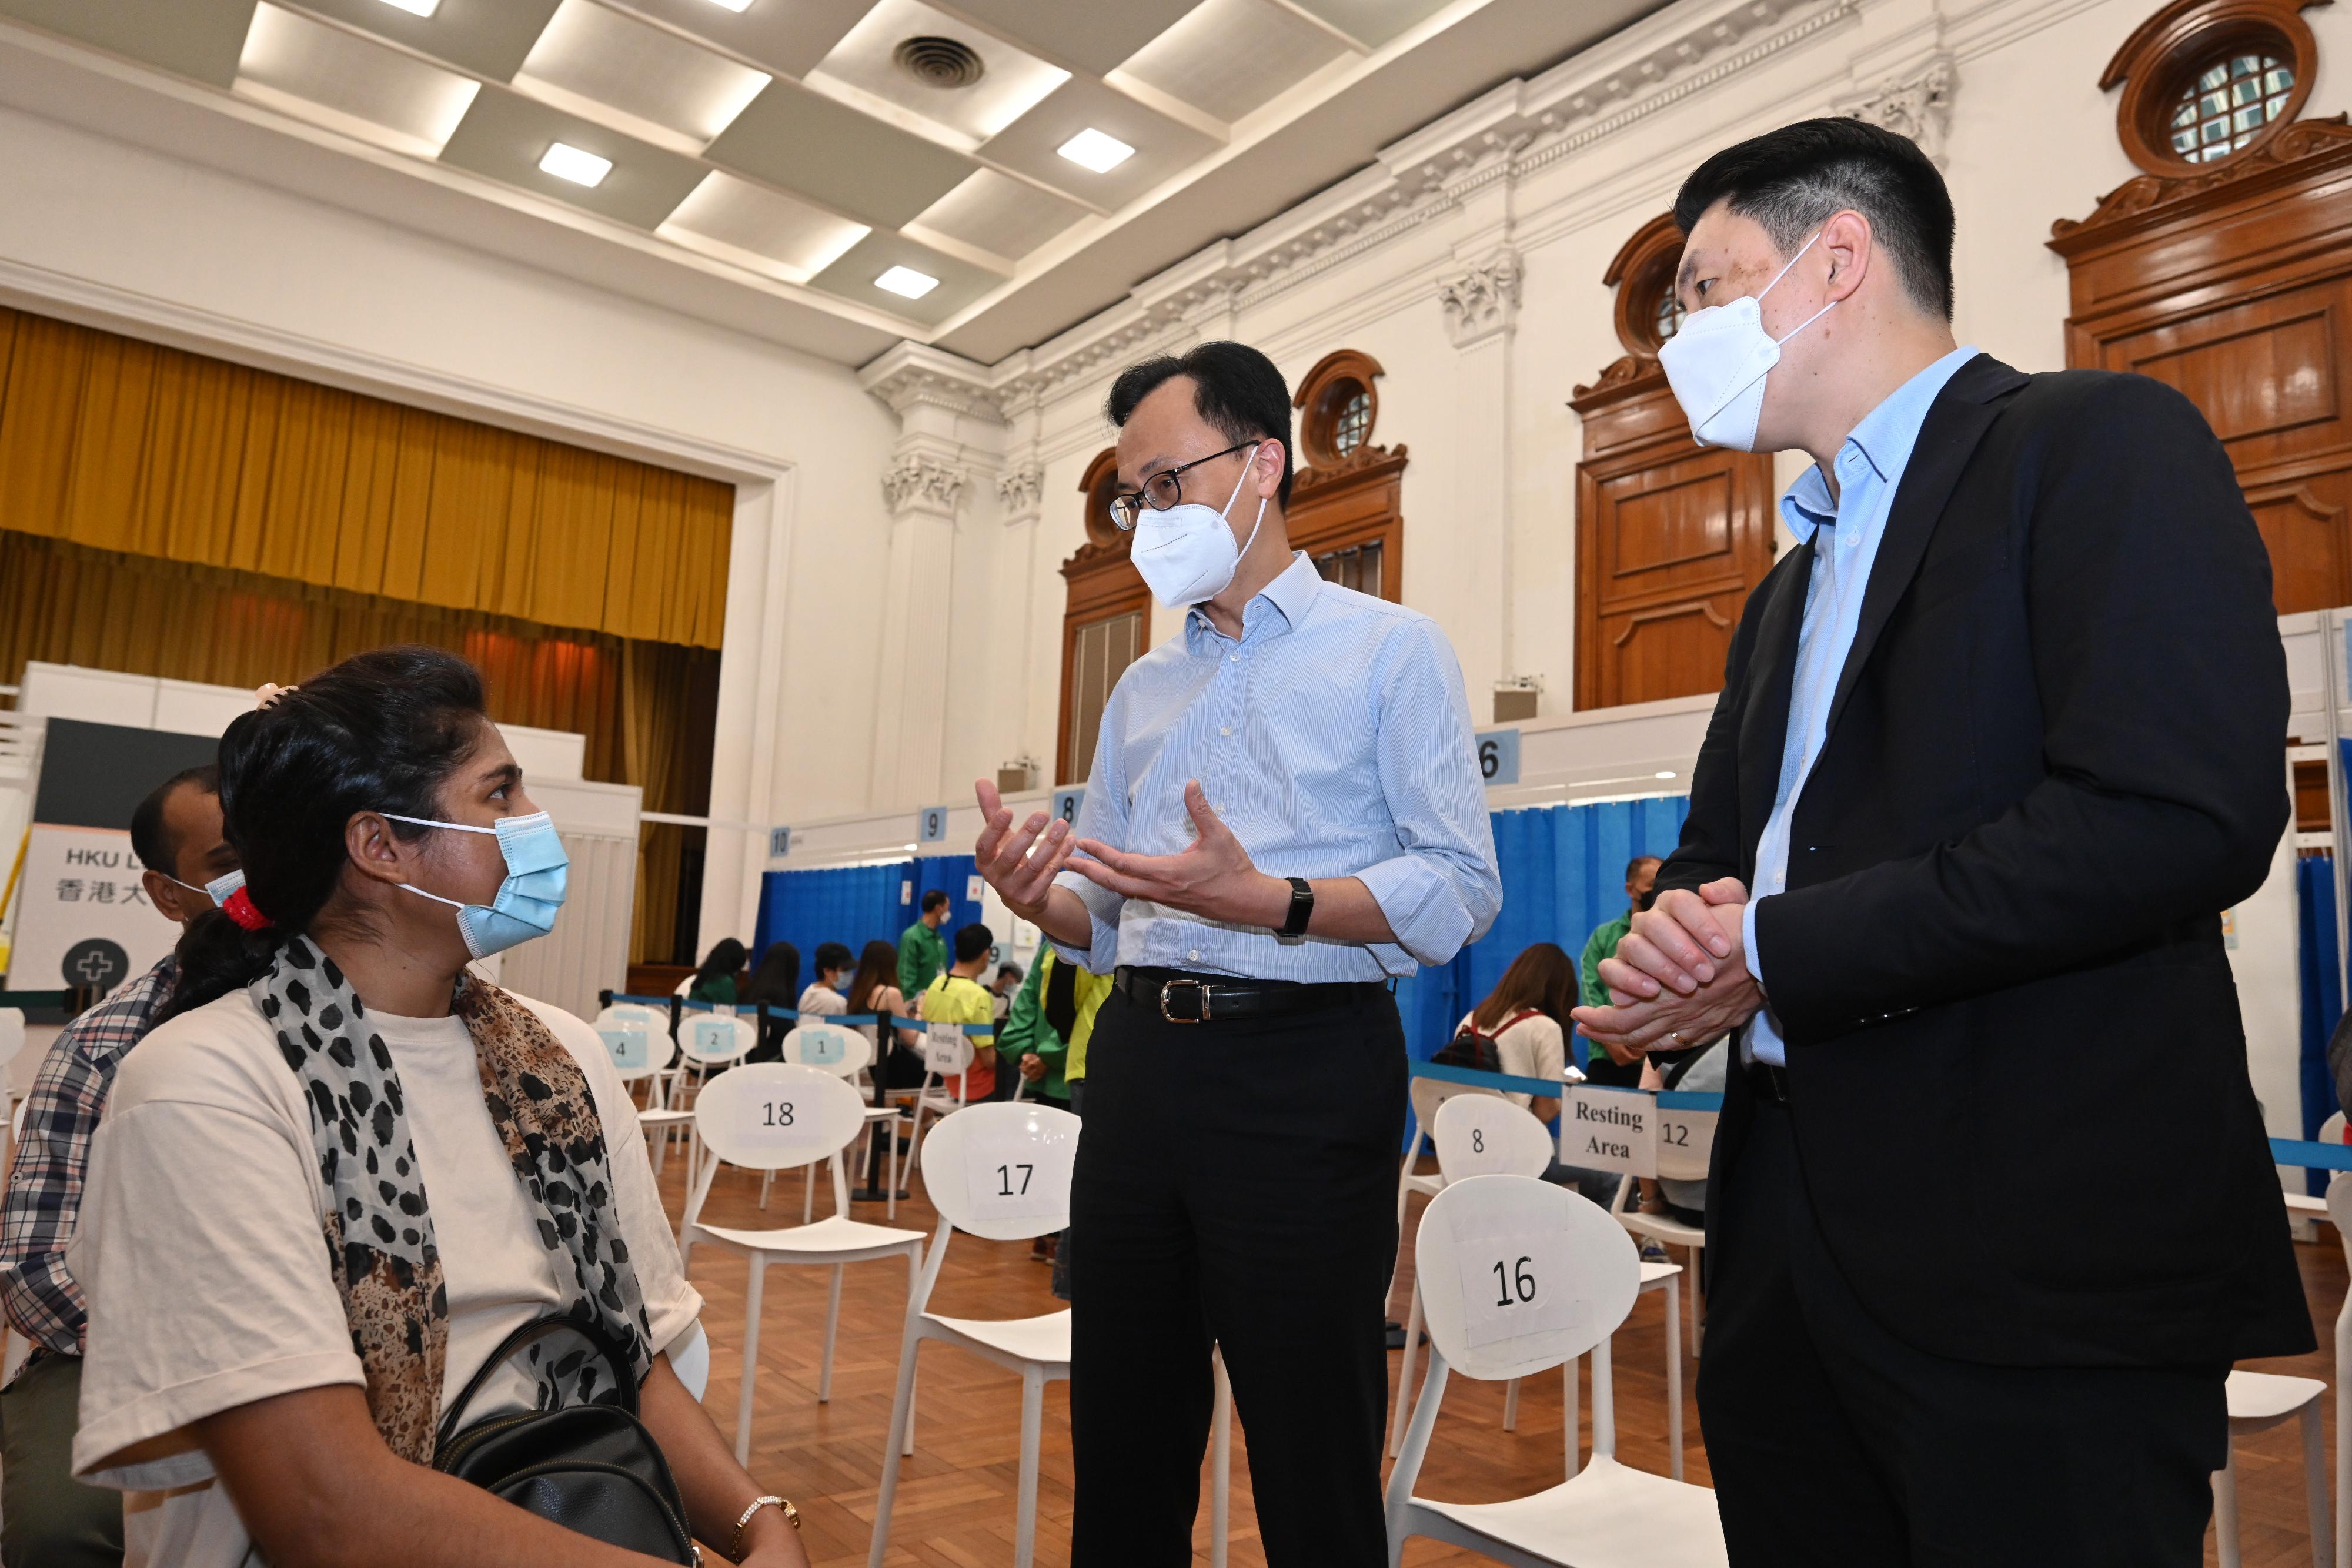 The Secretary for the Civil Service, Mr Patrick Nip, today (May 13) visited the Community Vaccination Centre (CVC) at Loke Yew Hall of the University of Hong Kong (HKU) to inspect its operation and express gratitude to the medical team and administrative support staff. Photo shows Mr Nip (centre) chatting with a member of the public who had just received COVID-19 vaccination. Looking on is the Doctor-in-charge of the CVC at Loke Yew Hall of HKU, Professor Ivan Hung (right).